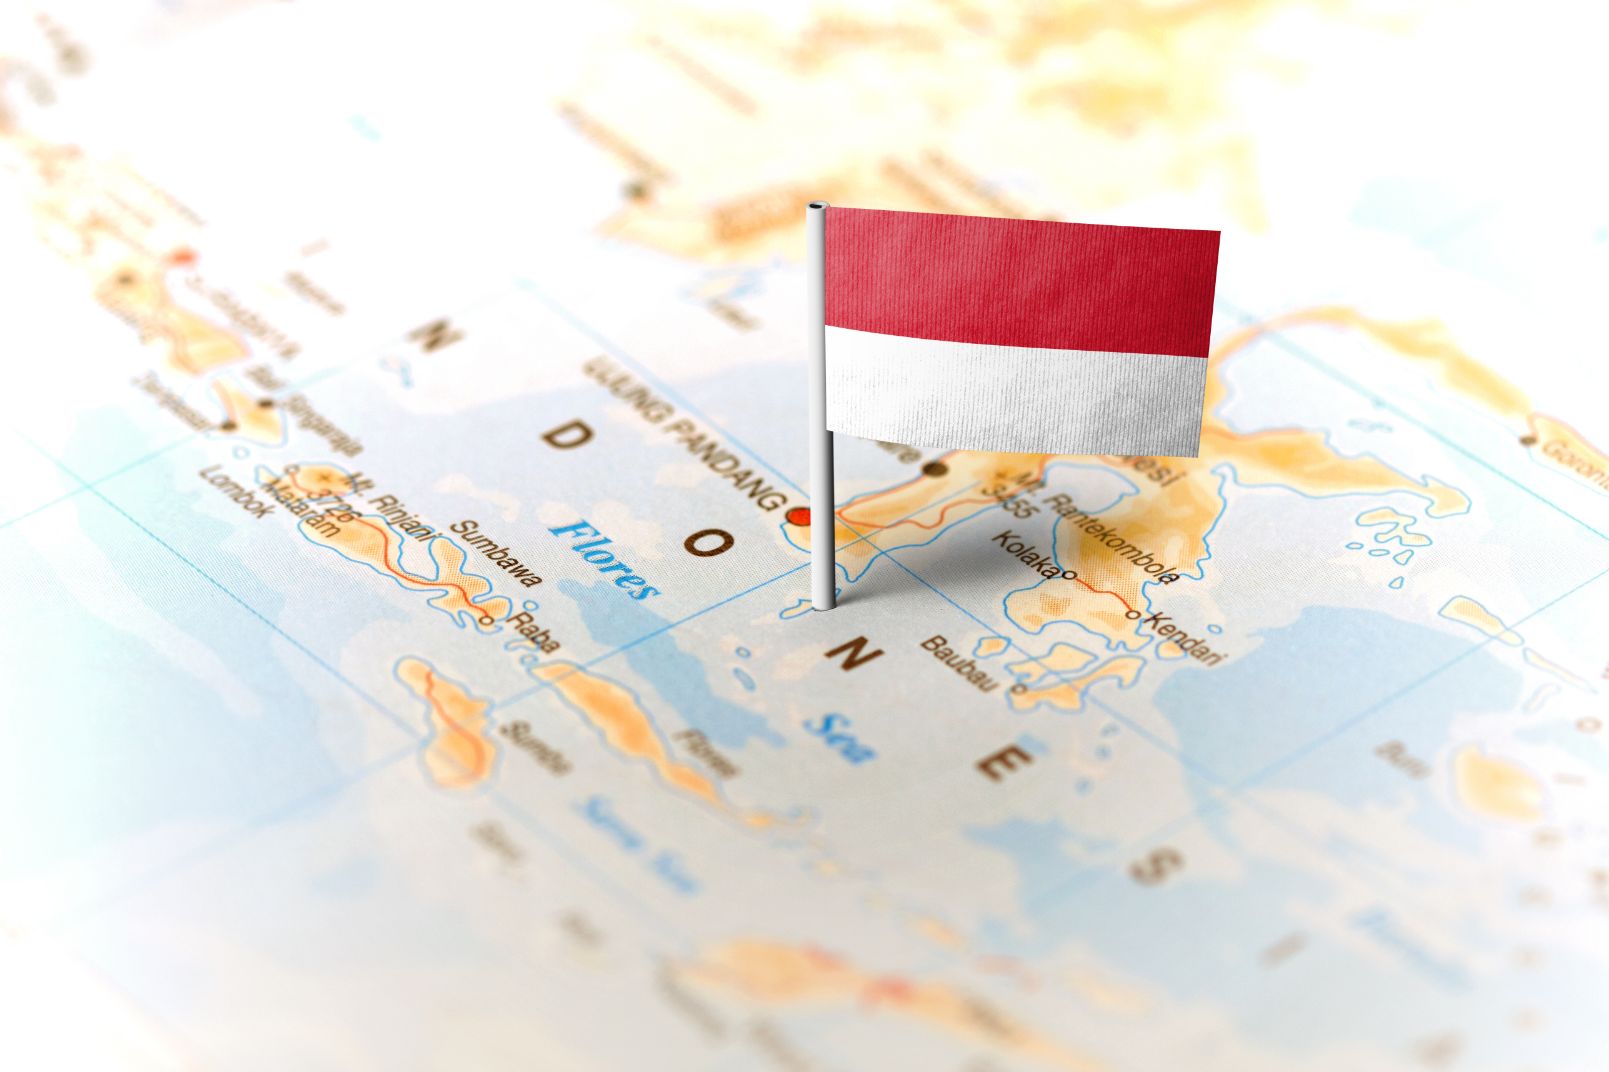 New document on benefit incidence analysis in Indonesia is now available